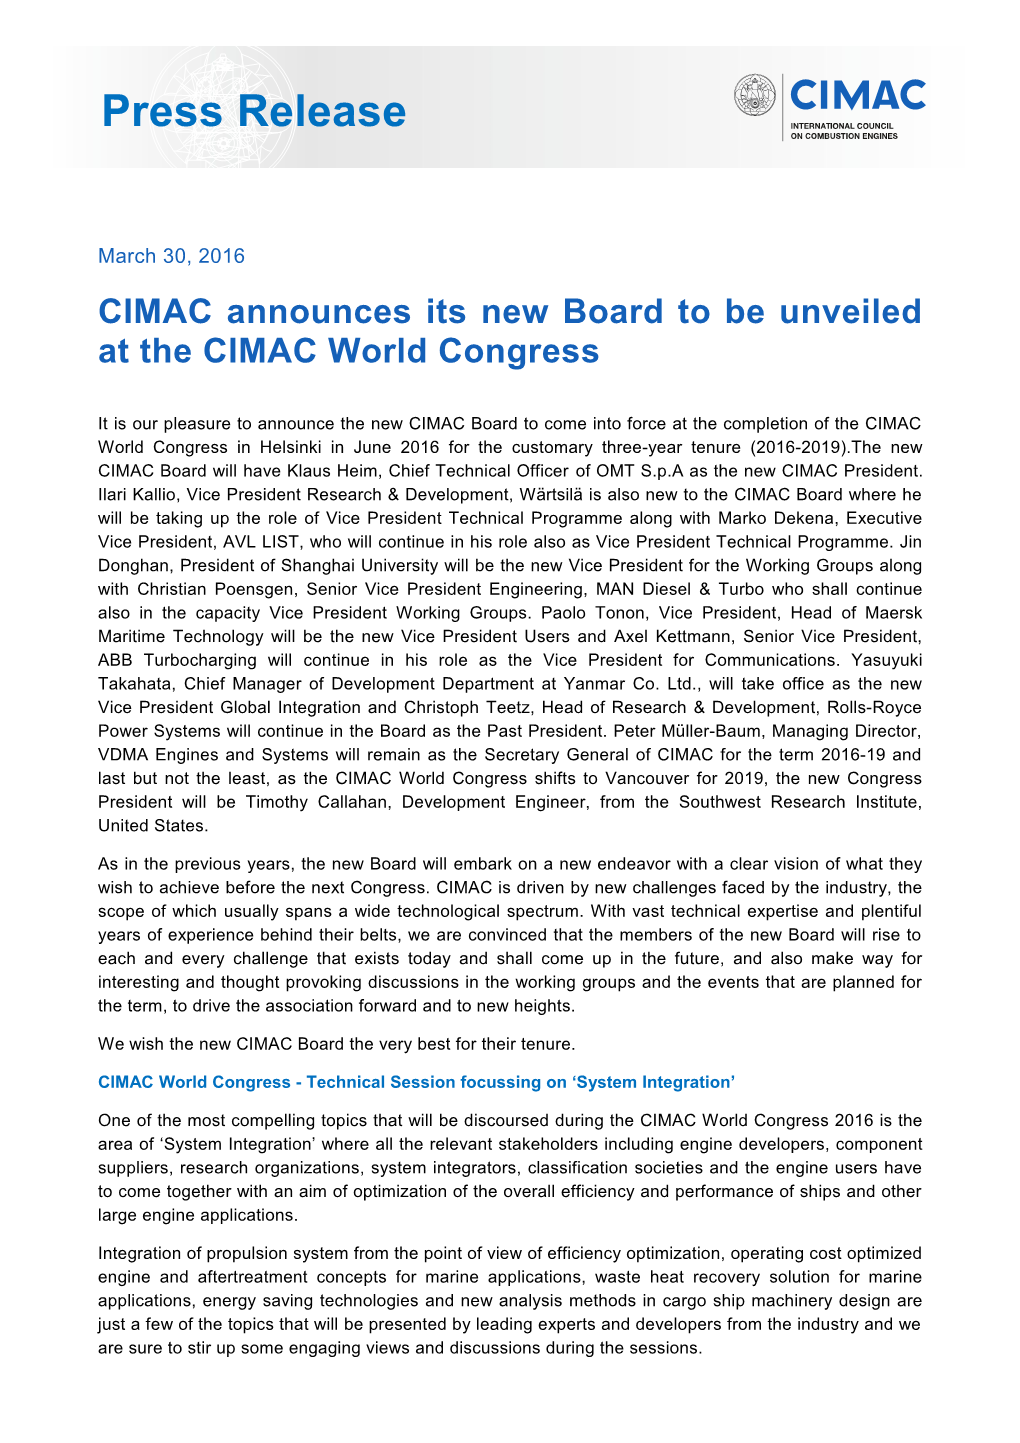 CIMAC Announces Its New Board to Be Unveiled at the CIMAC World Congress